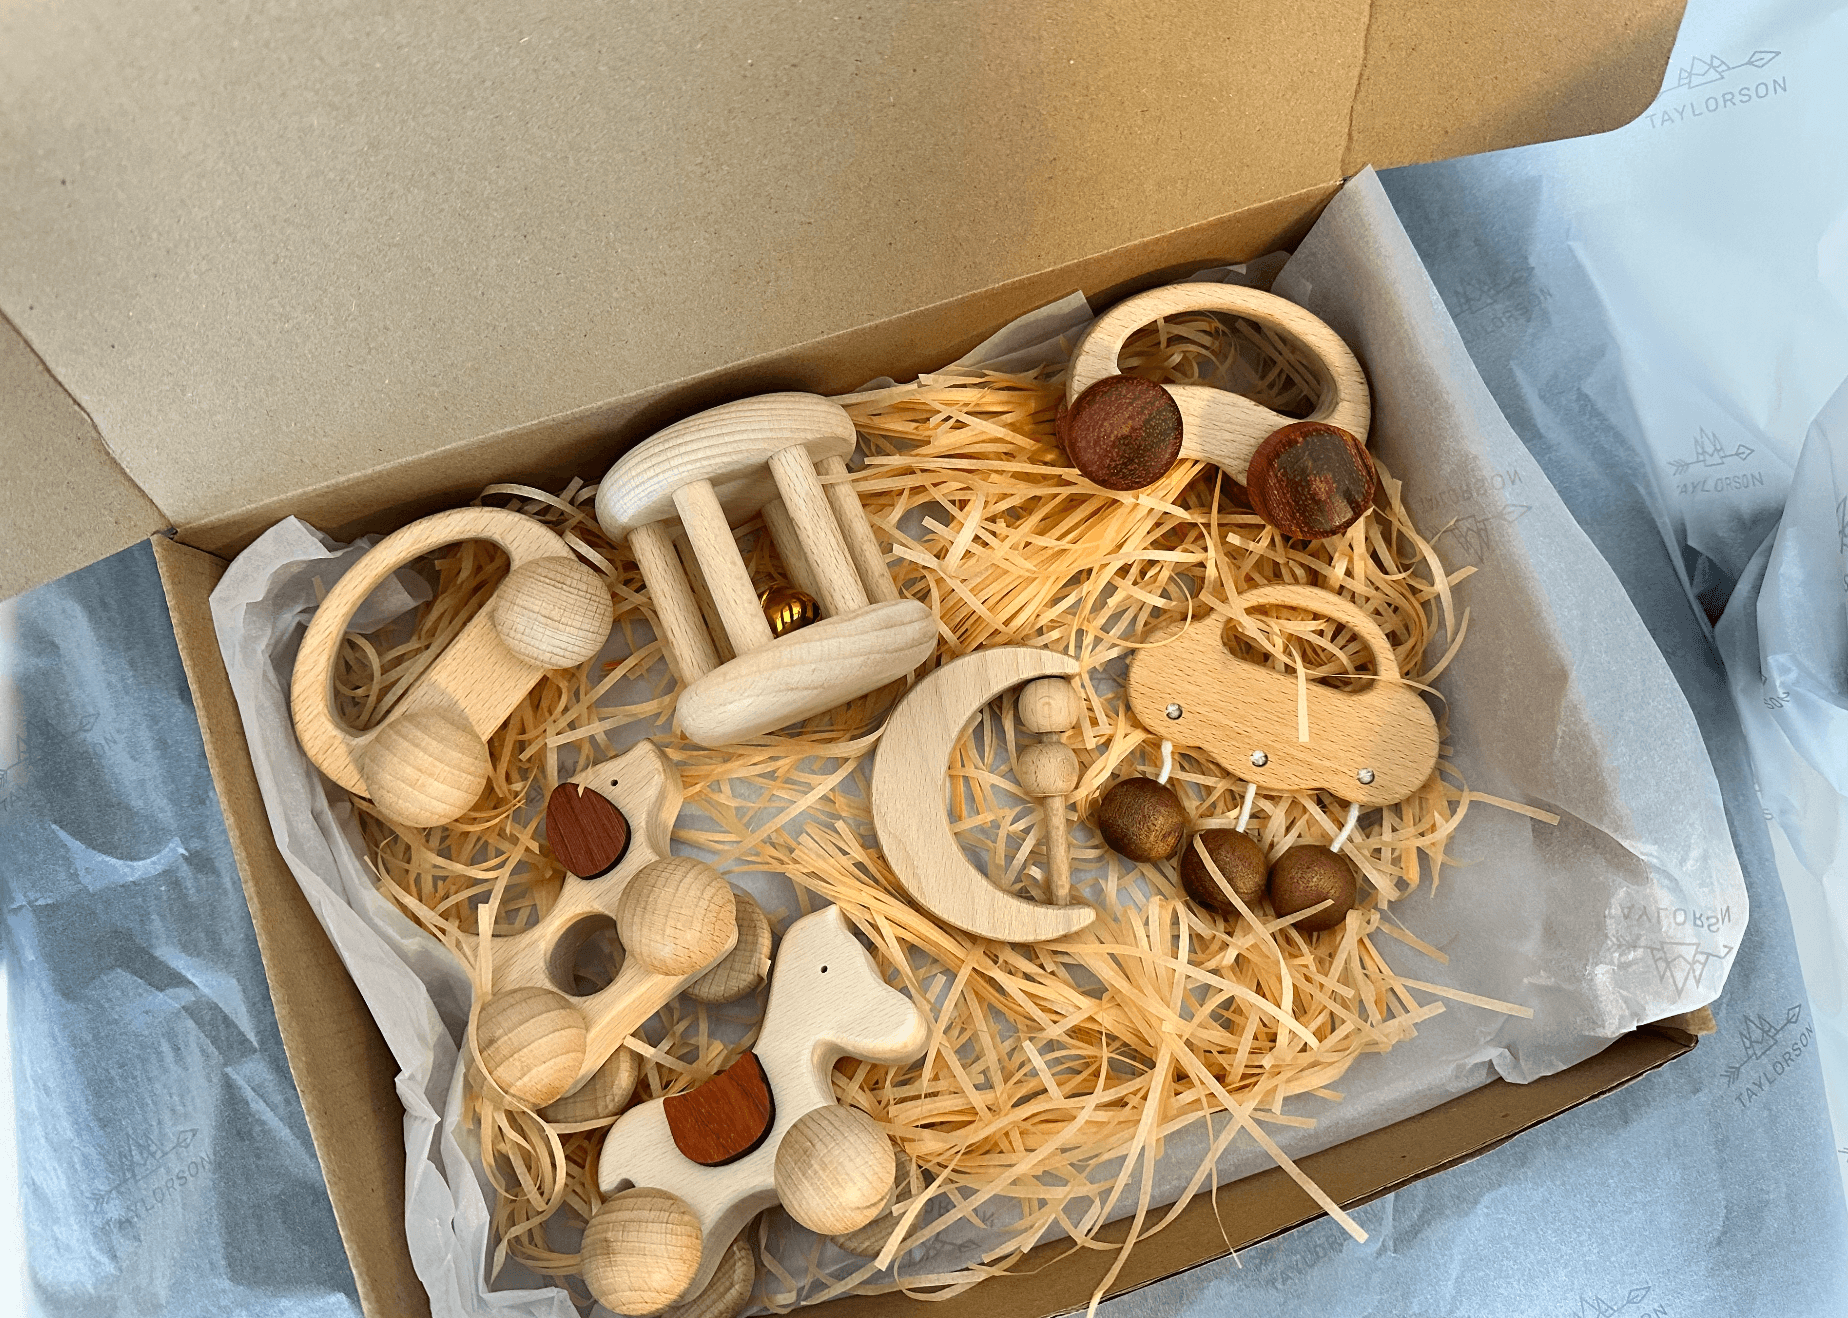 Delightful Baby Playtime Treasures: Charming Wooden Rattle & Toy Gift Sets (7pcs) - Taylorson